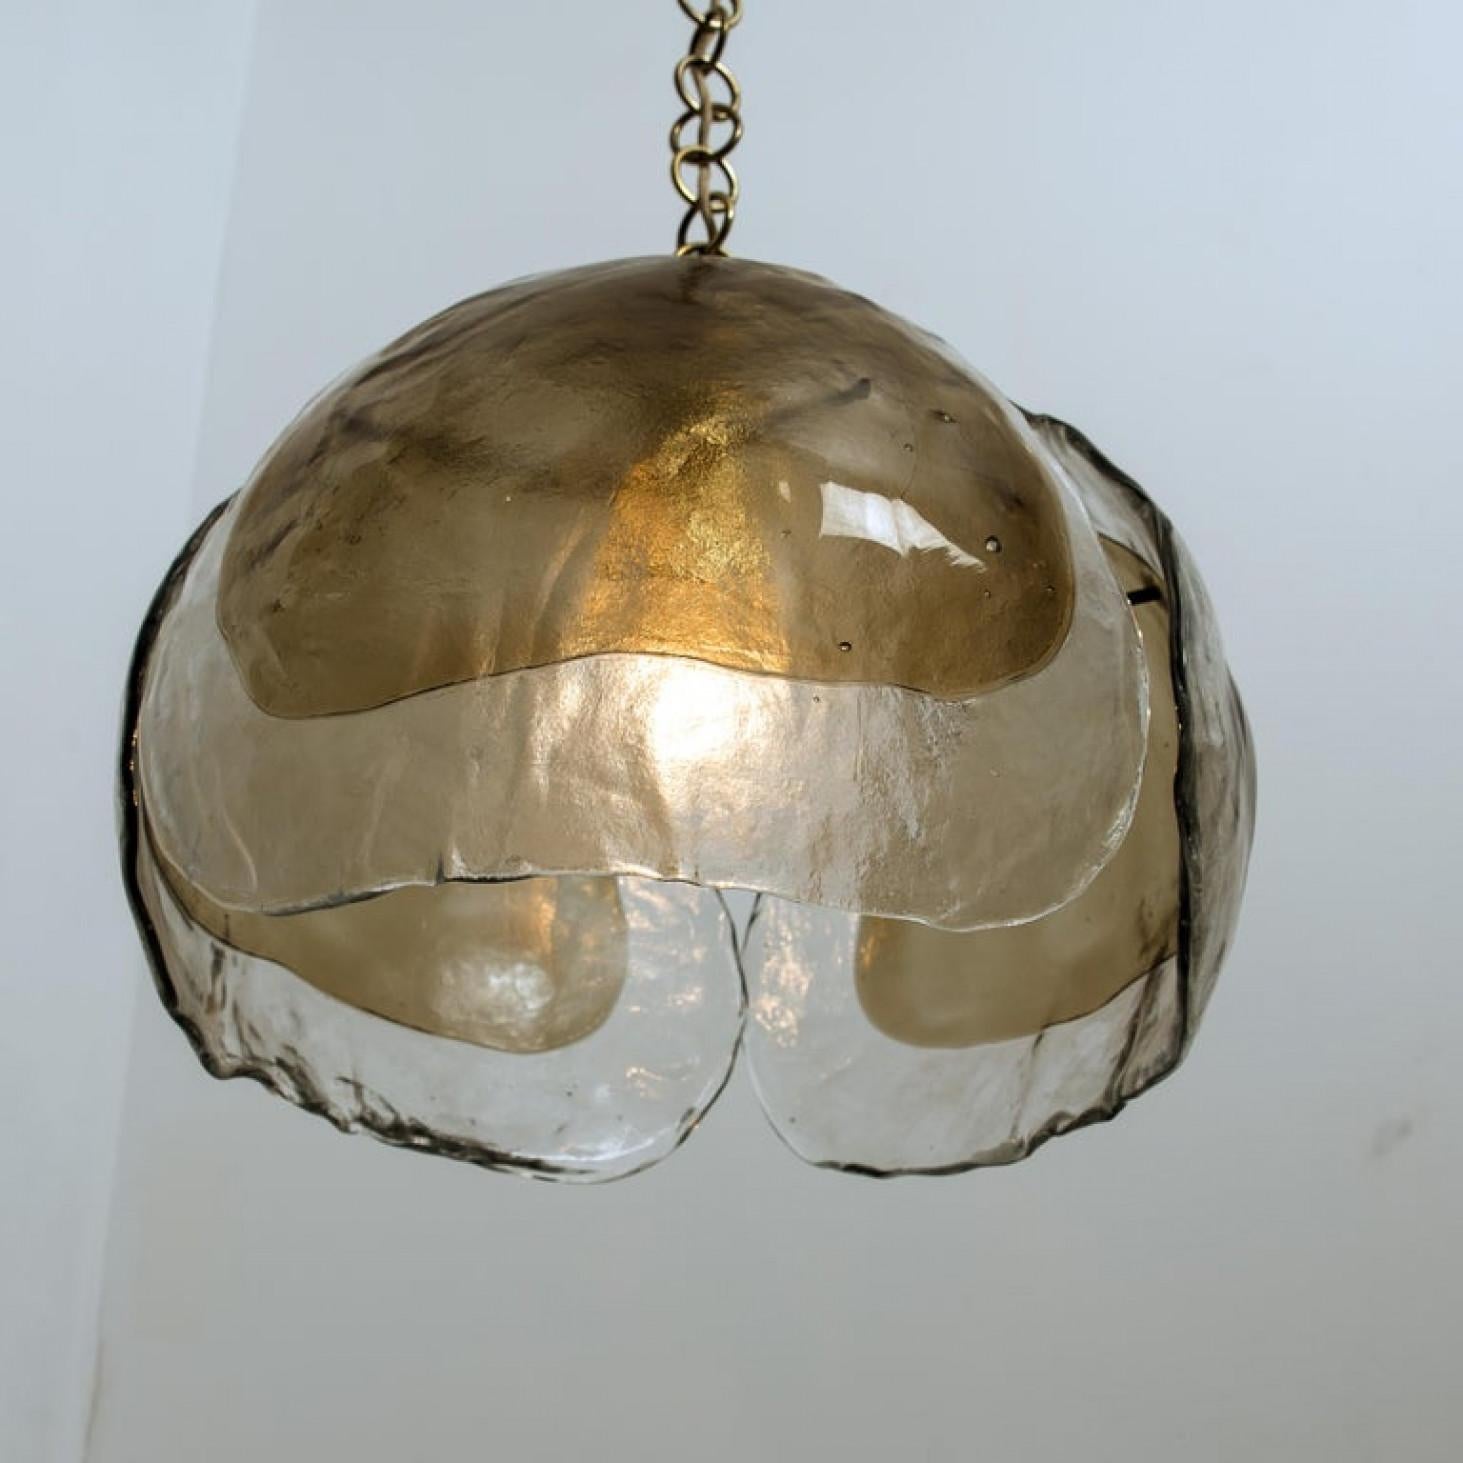 Pair of Murano Chandelier Pendant Lights, Amber Glass and Brass, 1970s For Sale 5